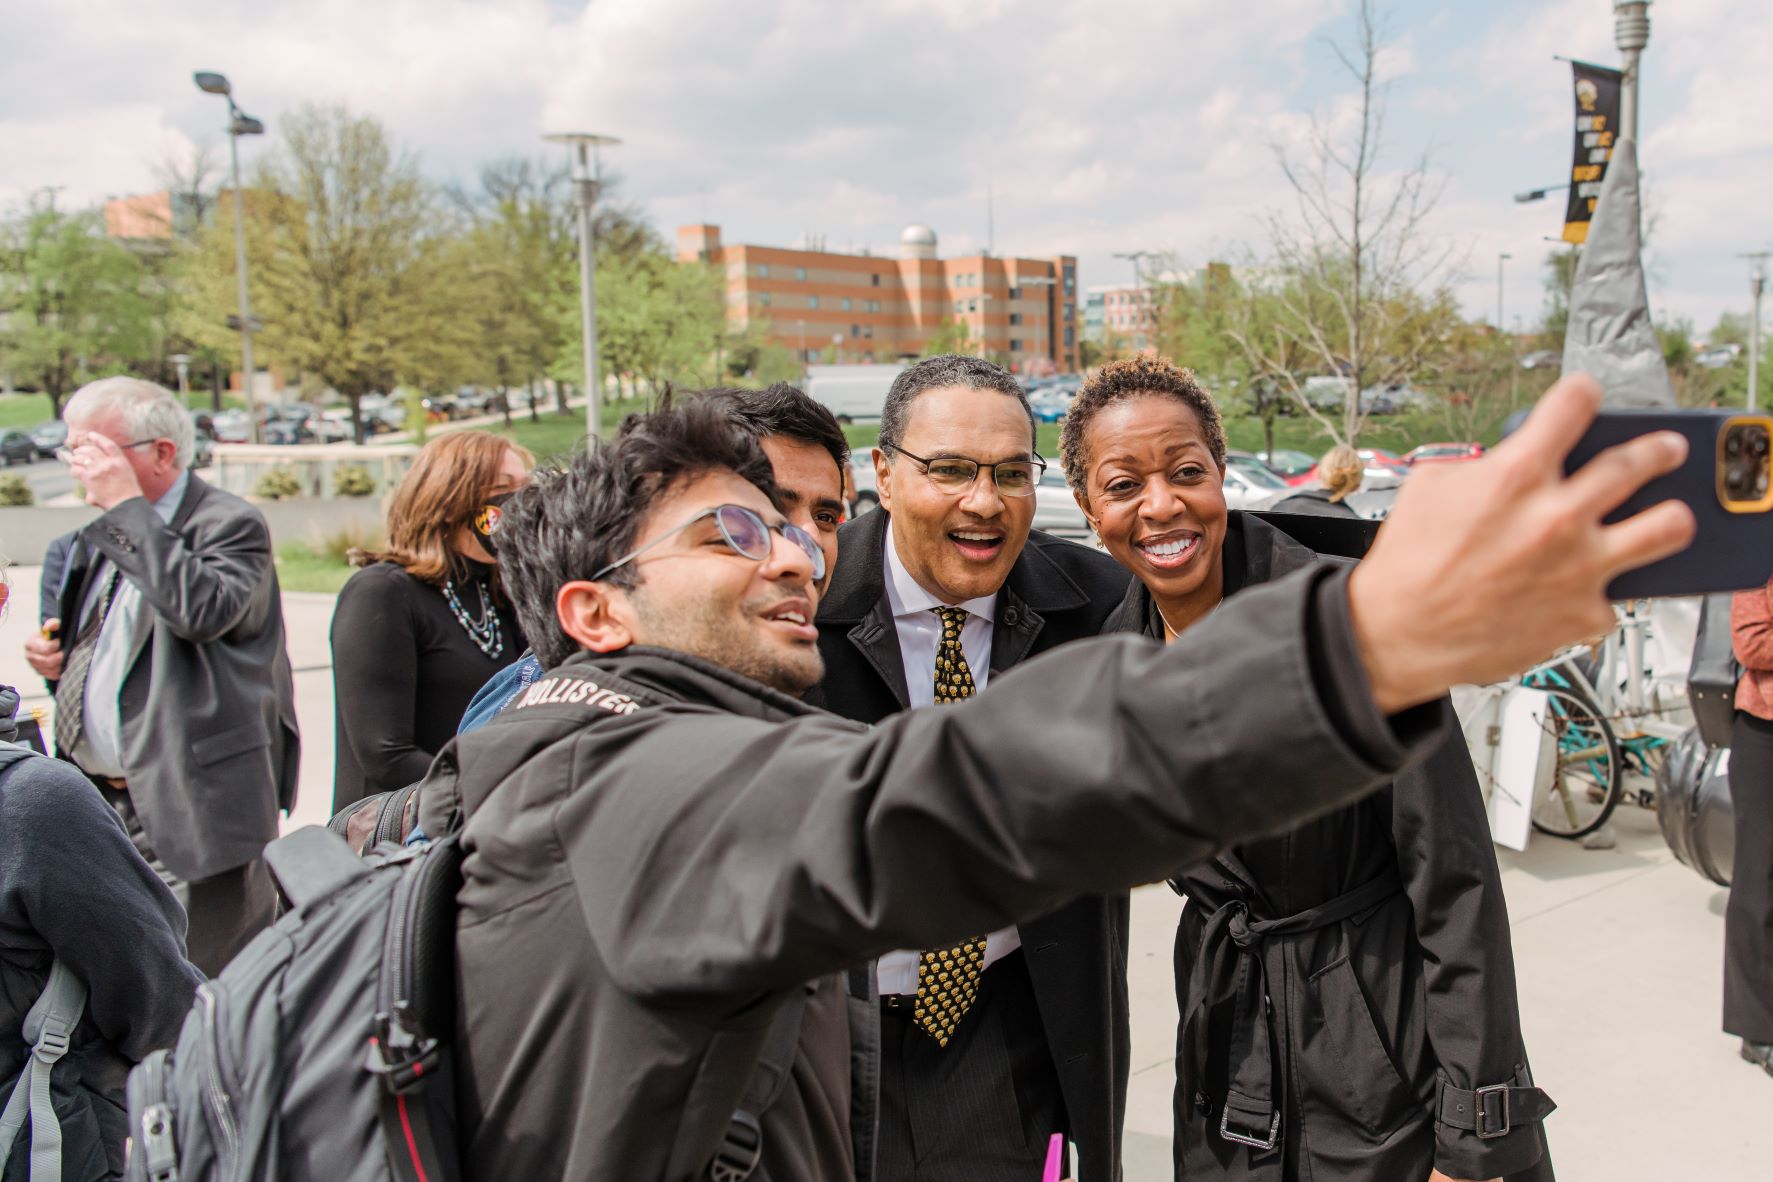 Chronicle report on “new era” of inclusive administration highlights UMBC leaders